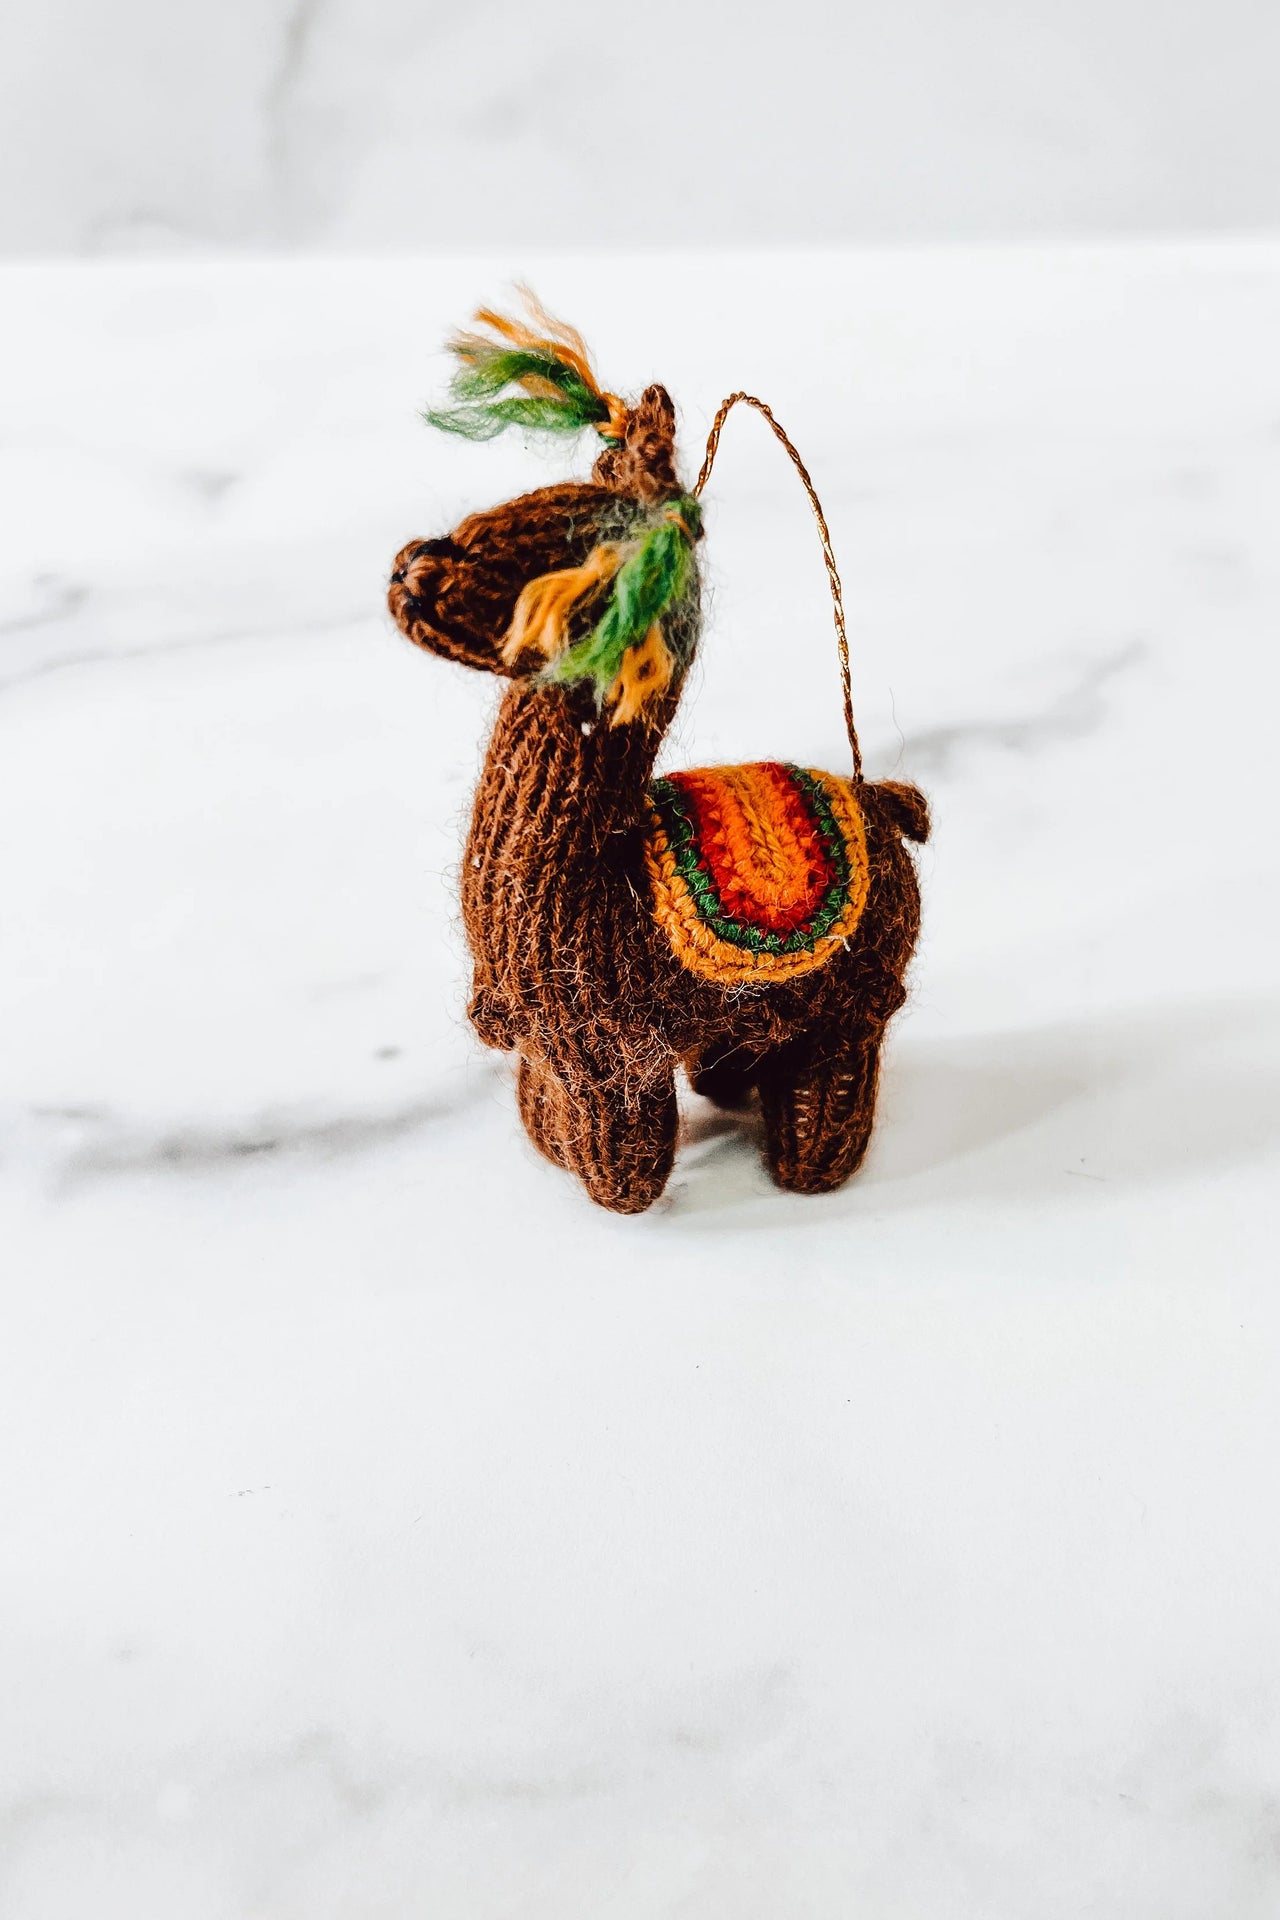 Knitted Animal Ornaments